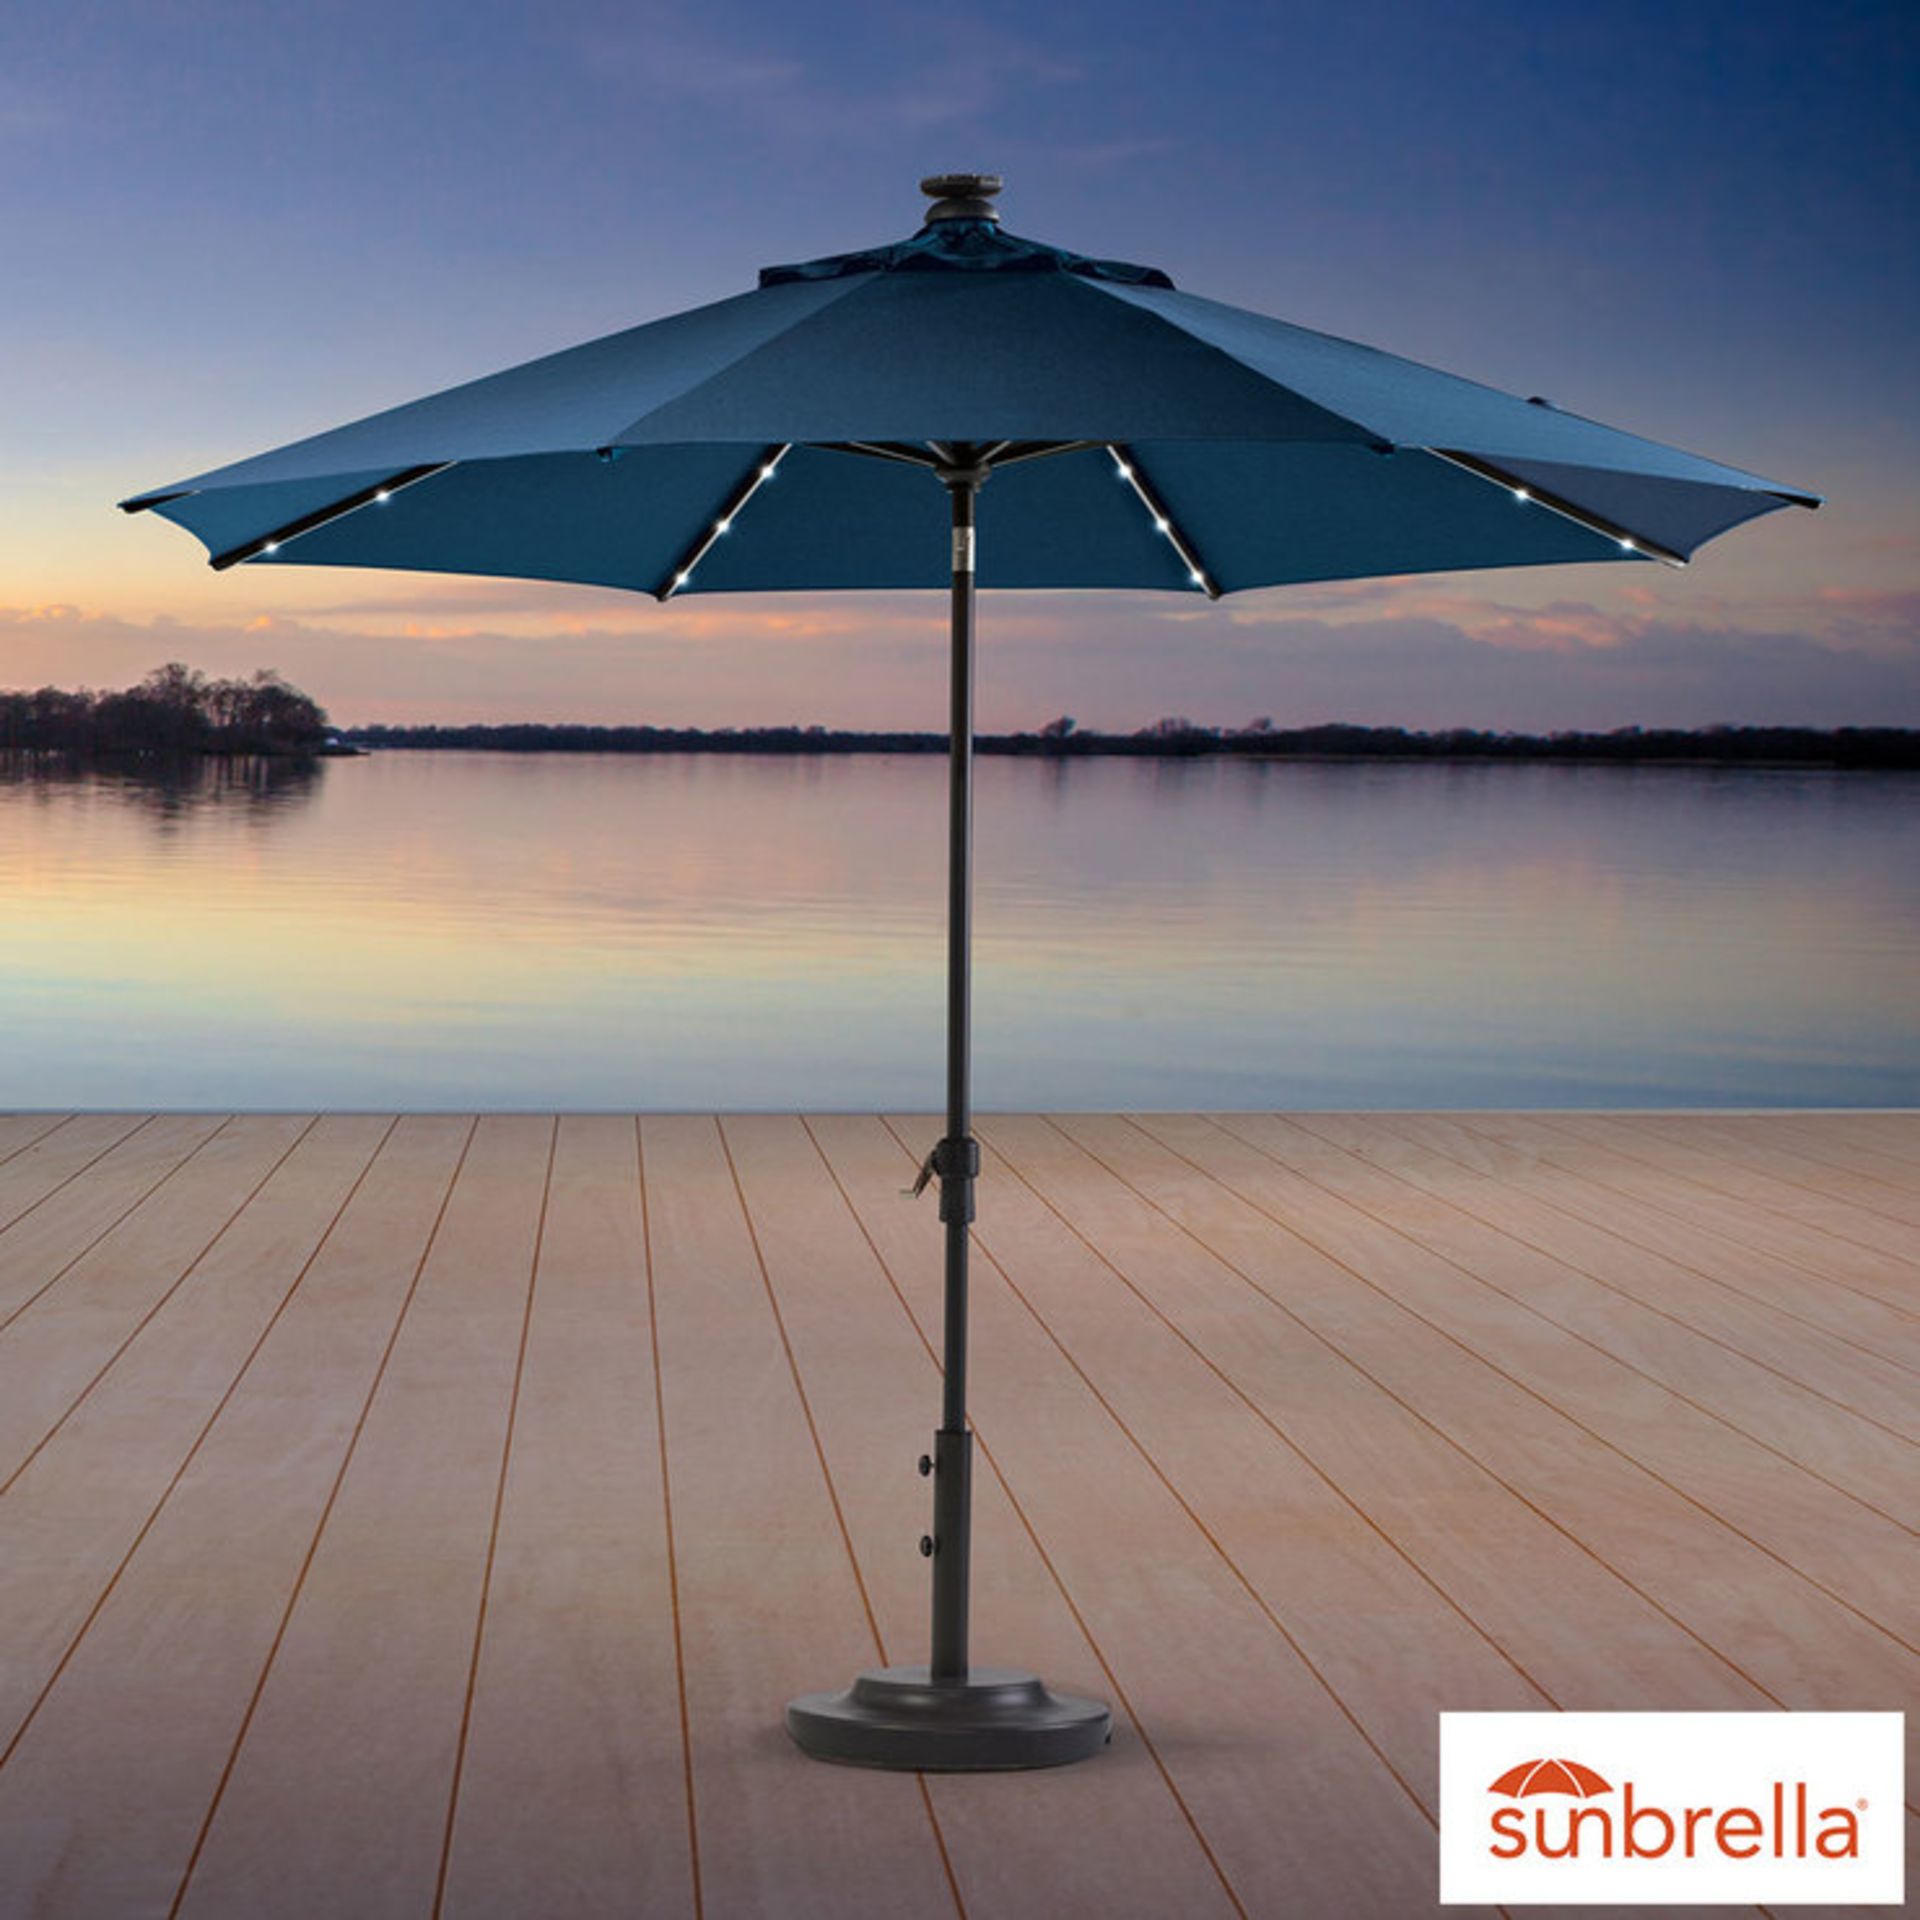 1 ACTIVA PROSHADE 10FT (3.05M) MARKET SOLAR POWERED 40 LED UMBRELLA BLUE RRP Â£219 (PICTURES FOR